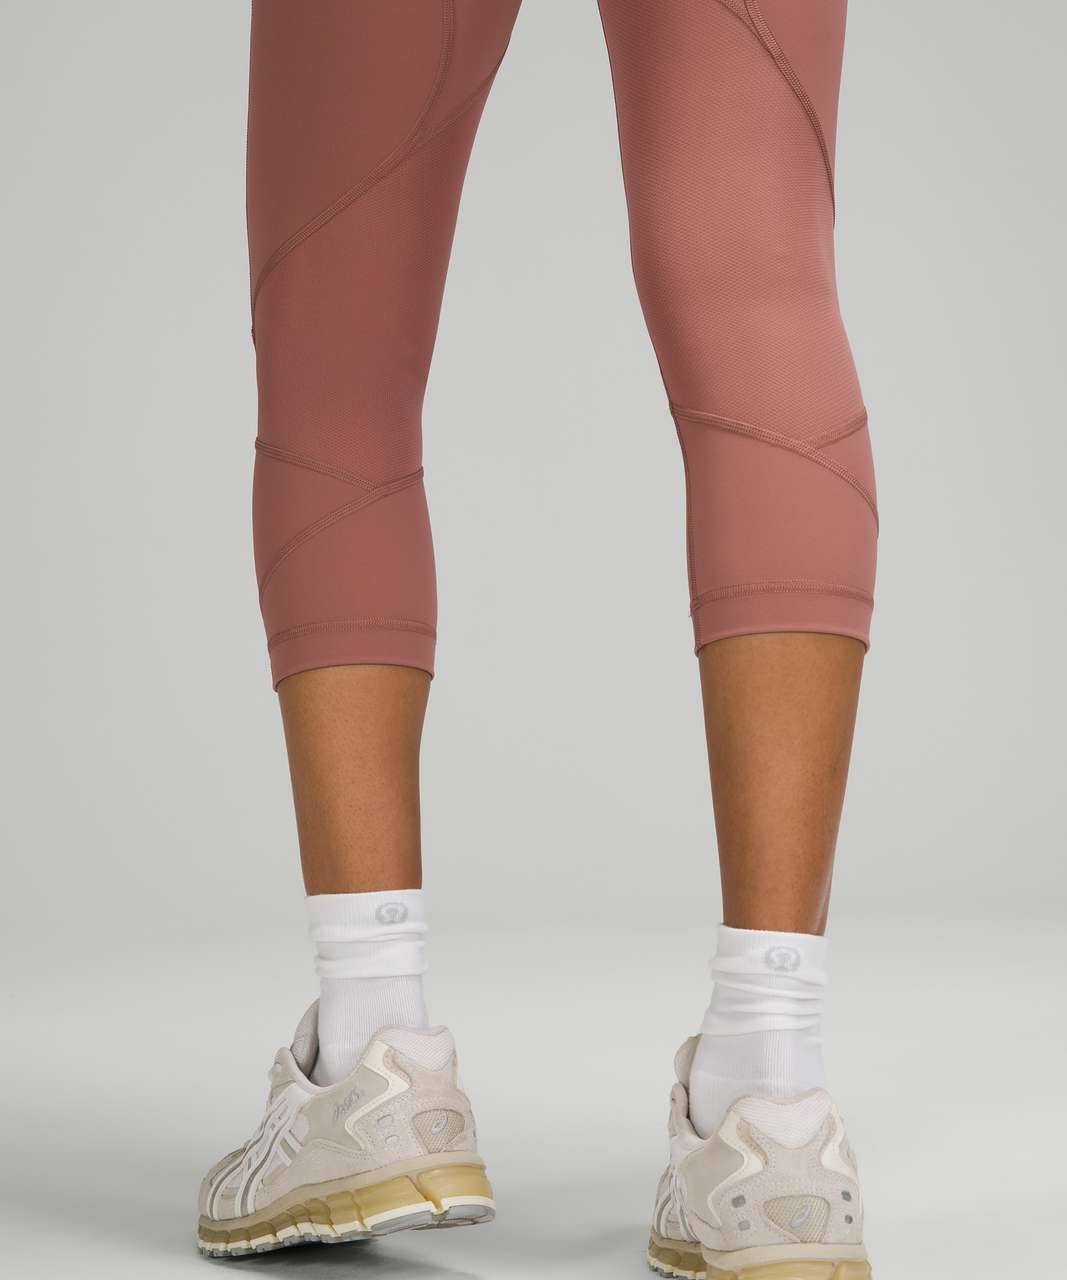 Lululemon Pace Rival High-Rise Crop 22" - Spiced Chai